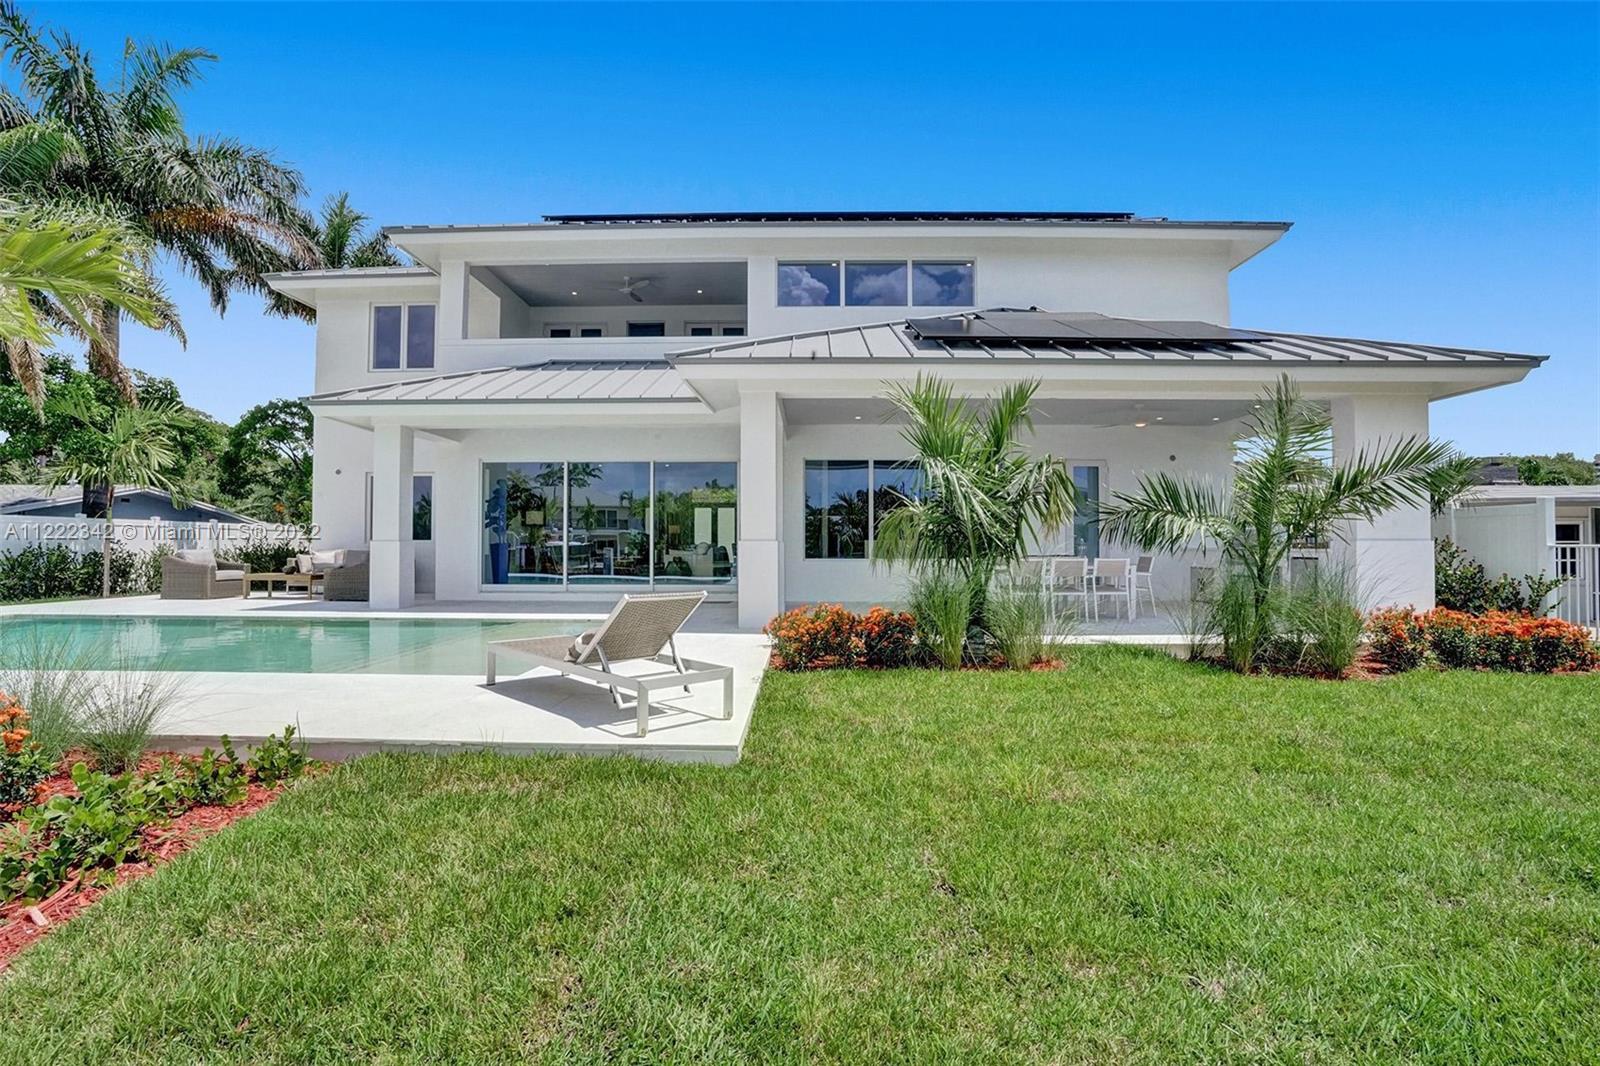 This brand new coastal-inspired Deepwater Estate in Hillsboro Shores has private beach access and a 85'+/- of waterfront.  

This 5 bedroom 5/12 bath + office home offers light-filled open interiors with expansive water views.  The custom Italian kitchen is fitted with top-of-the-line Jennaire appliances and Italian cabinetry.  Outdoor entertaining is a breeze at the resort-style pool with a sun shelf and outdoor kitchen. Sited just off the Intracoastal a brand new, full-service concrete dock offers direct access with no fixed bridges to the ocean via the Hillsboro Inlet and the ocean is just a short cruise away.  

Sustainable and functional; the house is equipped with solar panels, plentiful storage, a pantry/laundry, and a dedicated package delivery room.